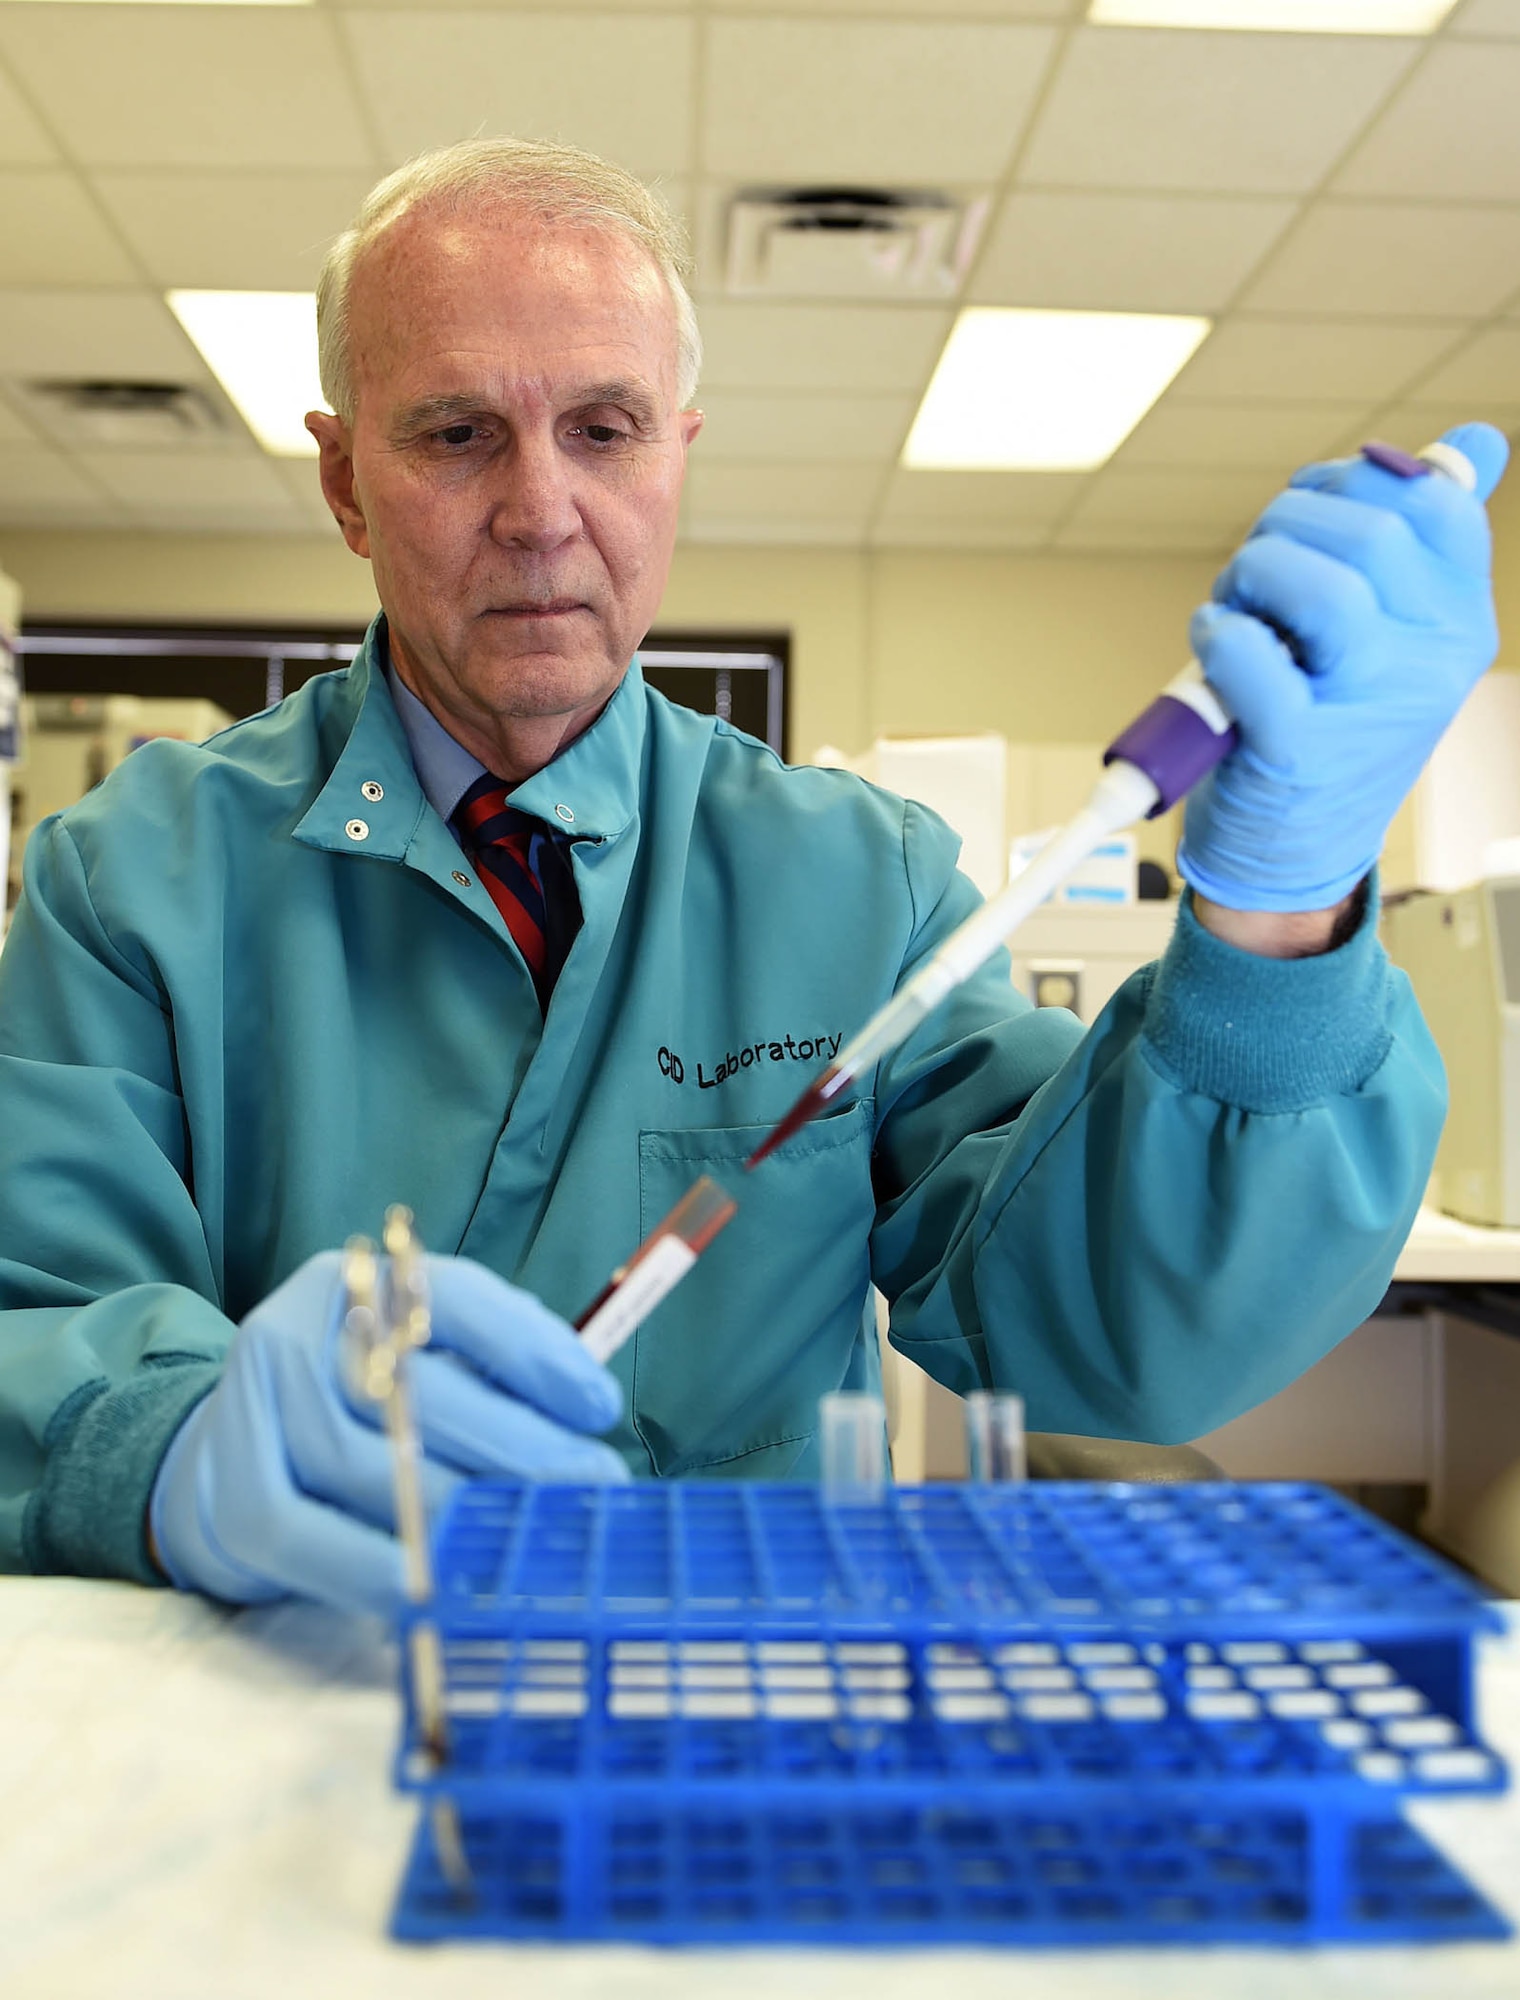 Clinical research scientist David McGlasson pipets a blood sample for analysis Aug. 18, 2015 at the 59th Medical Wing’s Clinical Research Division facility on Joint Base San Antonio-Lackland, Texas. McGlasson recently received the American Society for Clinical Laboratory Science’s Scientific Researcher of the Year Award for 2015, his eighth win since 2002. (U.S. Air Force photo by Staff Sgt. Jerilyn Quintanilla) 